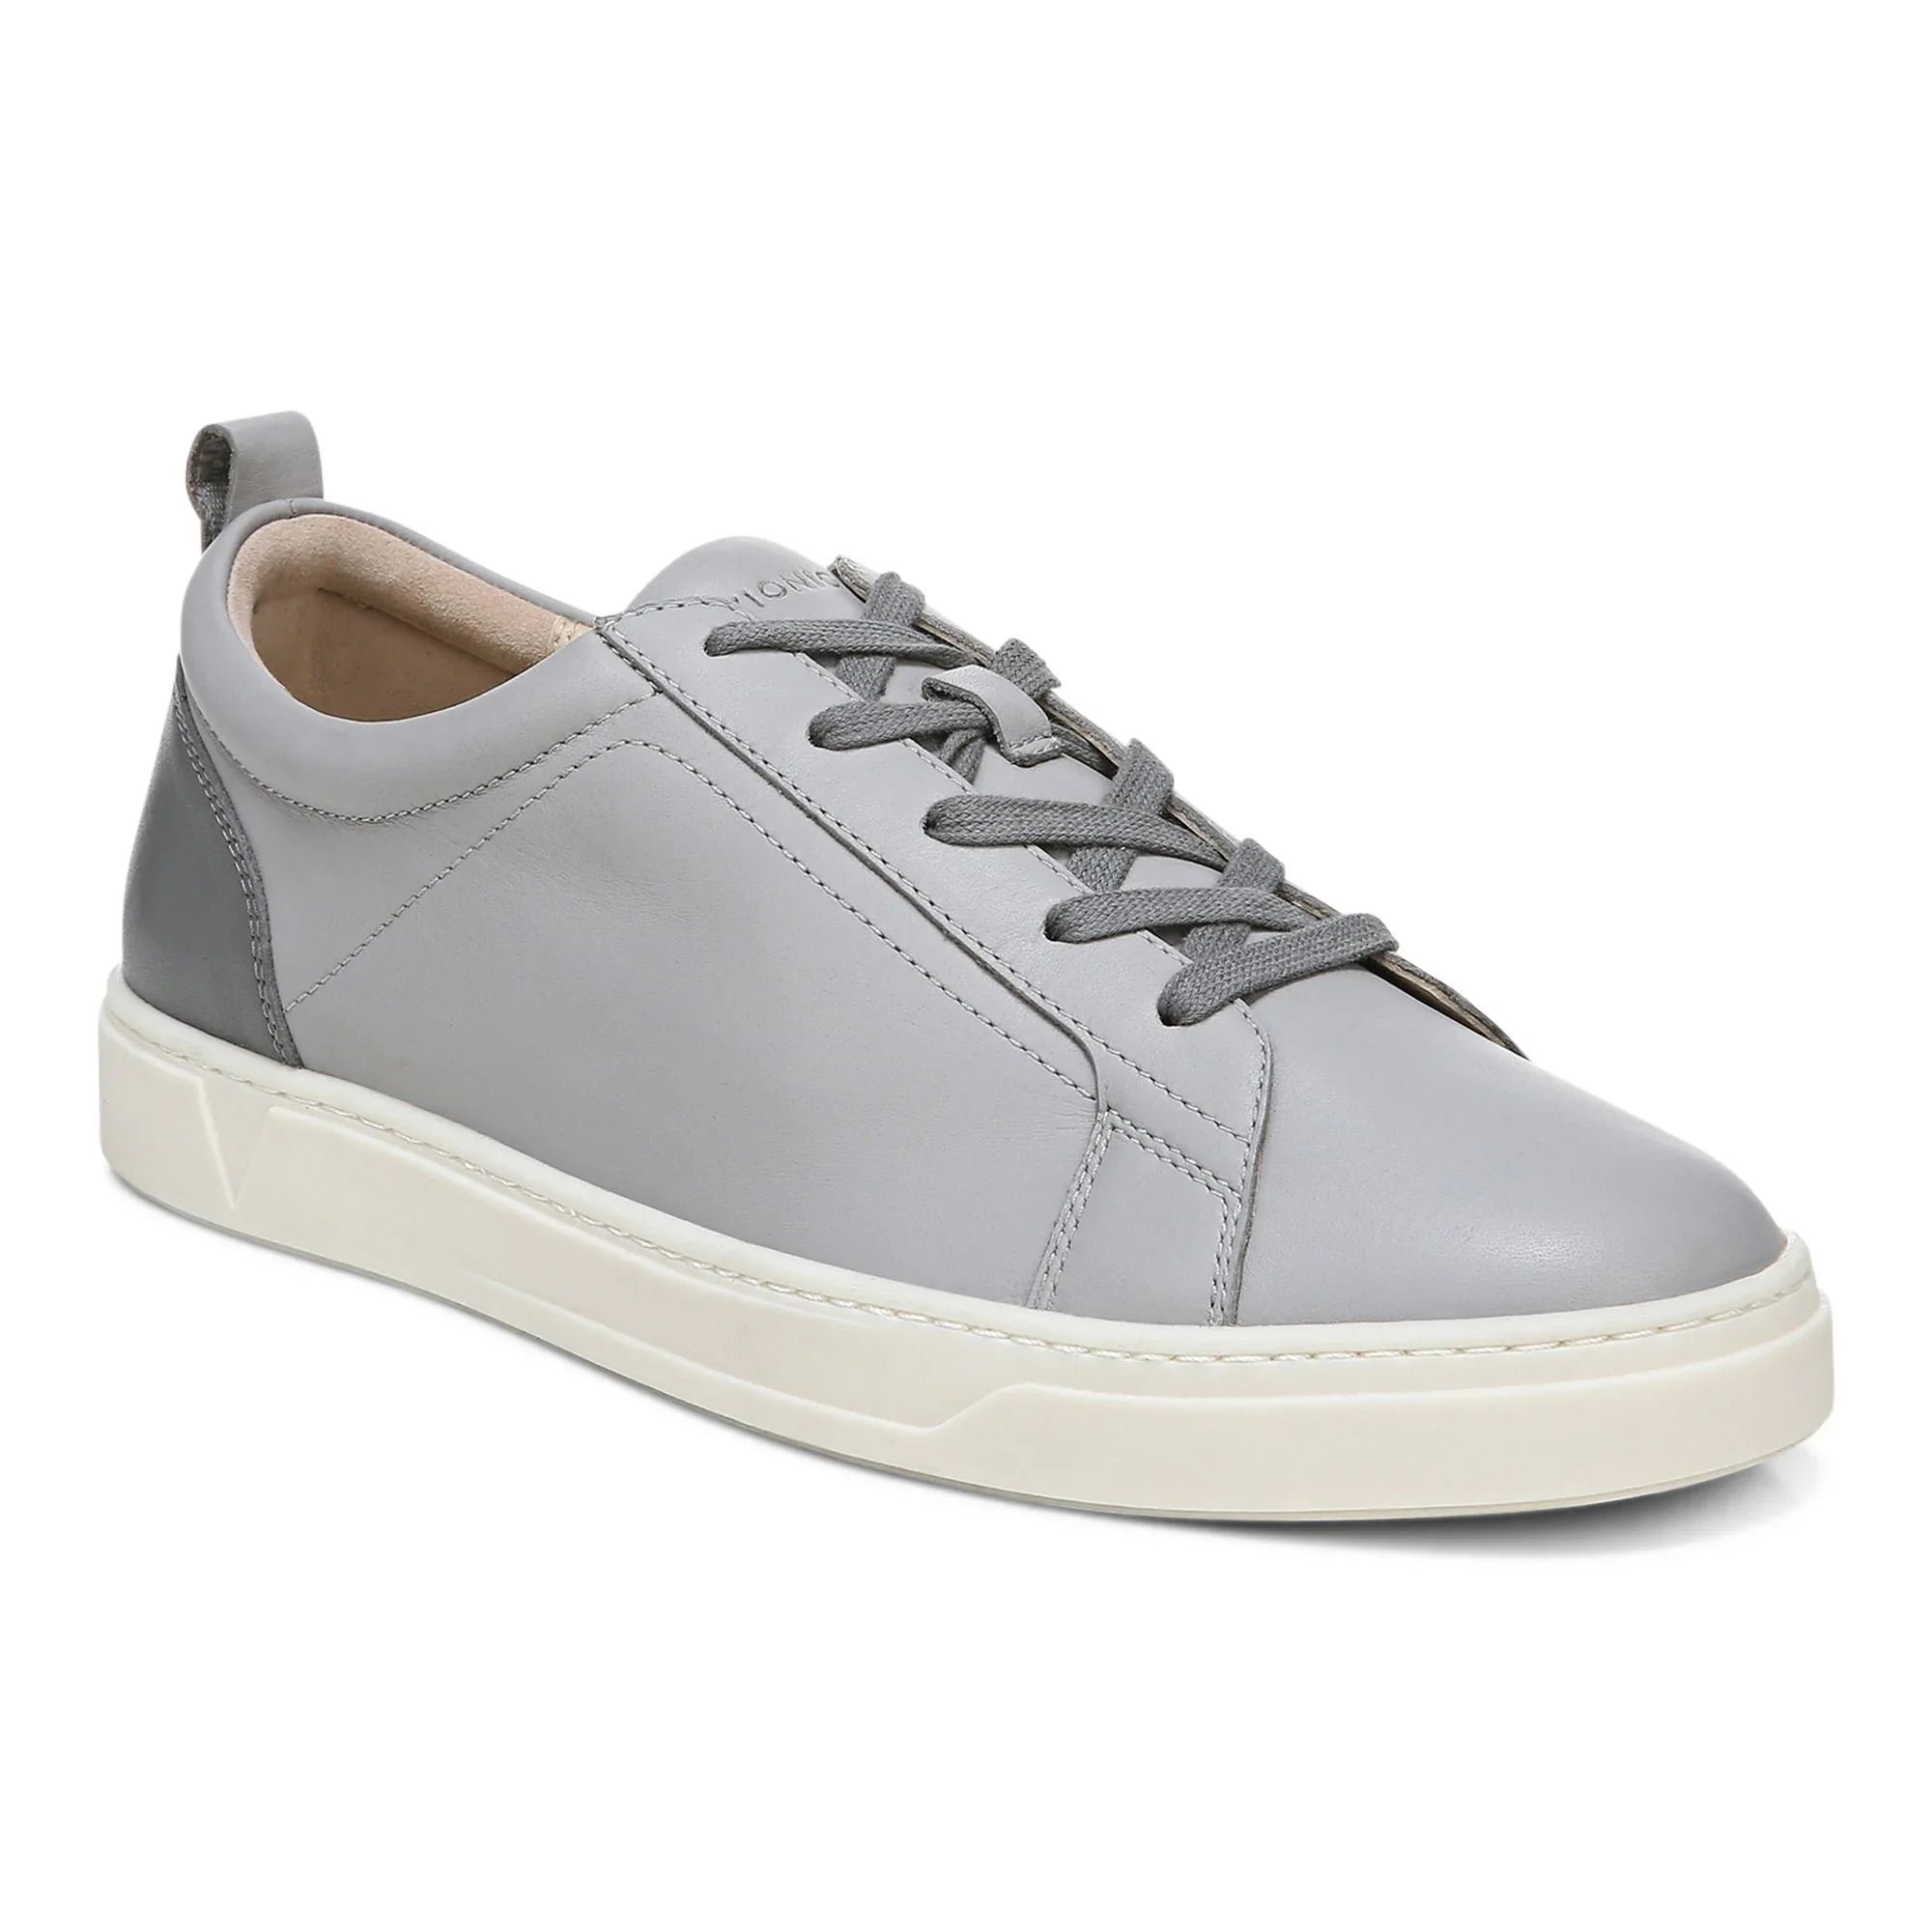 Lucas Lace Up Sneaker - The Shoe CollectiveVionic